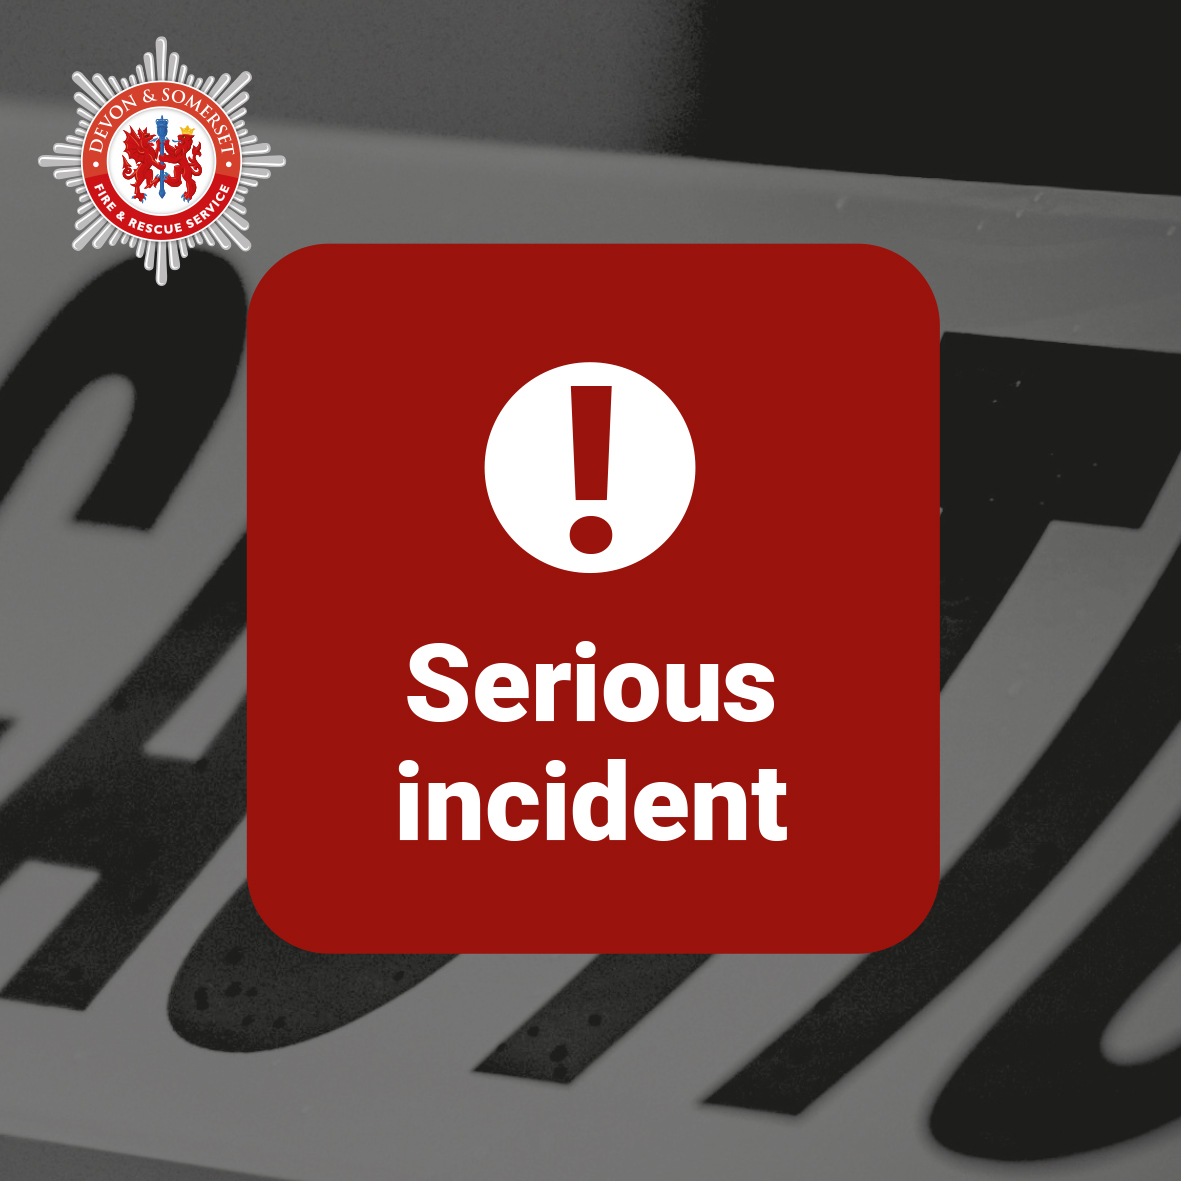 ⚠️ *URGENT: 999 system failure* Following a critical technical issue that is affecting emergency services nationally, calls to 999 are not currently working. Until resolved, you should contact 101 in any emergency. We will update you when it's resolved.